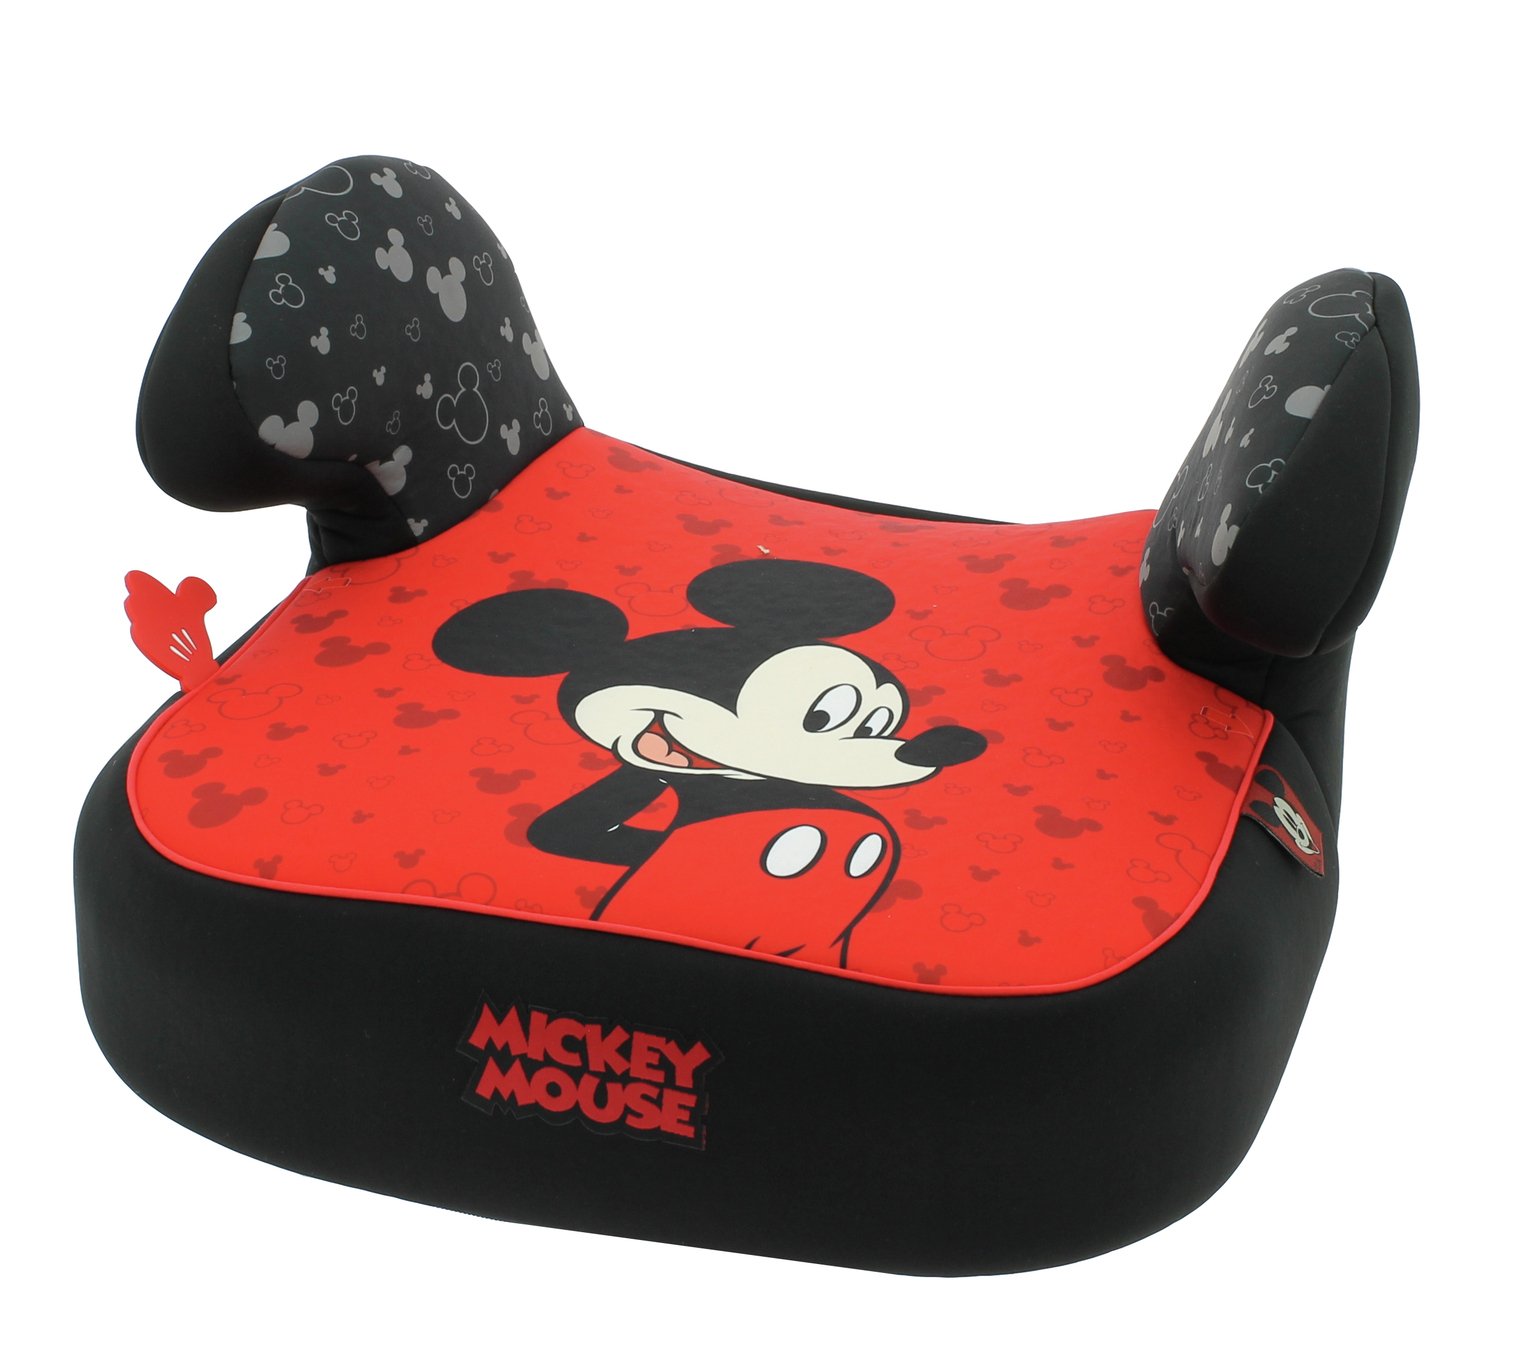 Disney Mickey Mouse Group 2/3 Booster Seat - Black and Red